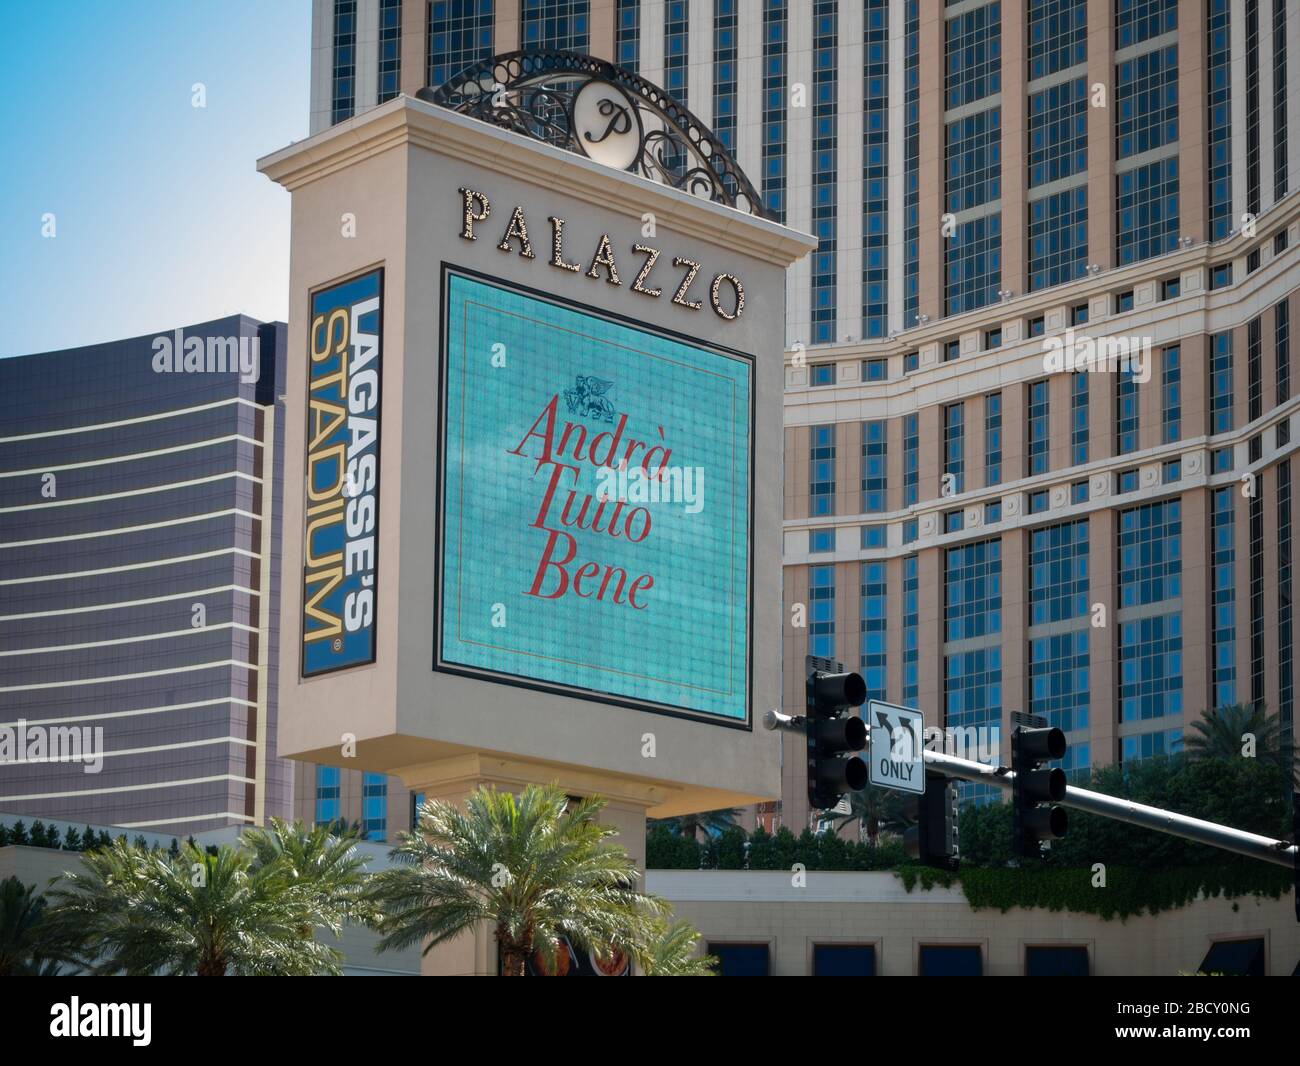 4 April 2020, Las Vegas, Nevada, USA, Palazzo Casino sign with andra tutto bene (everything will be fine) message due to Covid-19 shut down Stock Photo